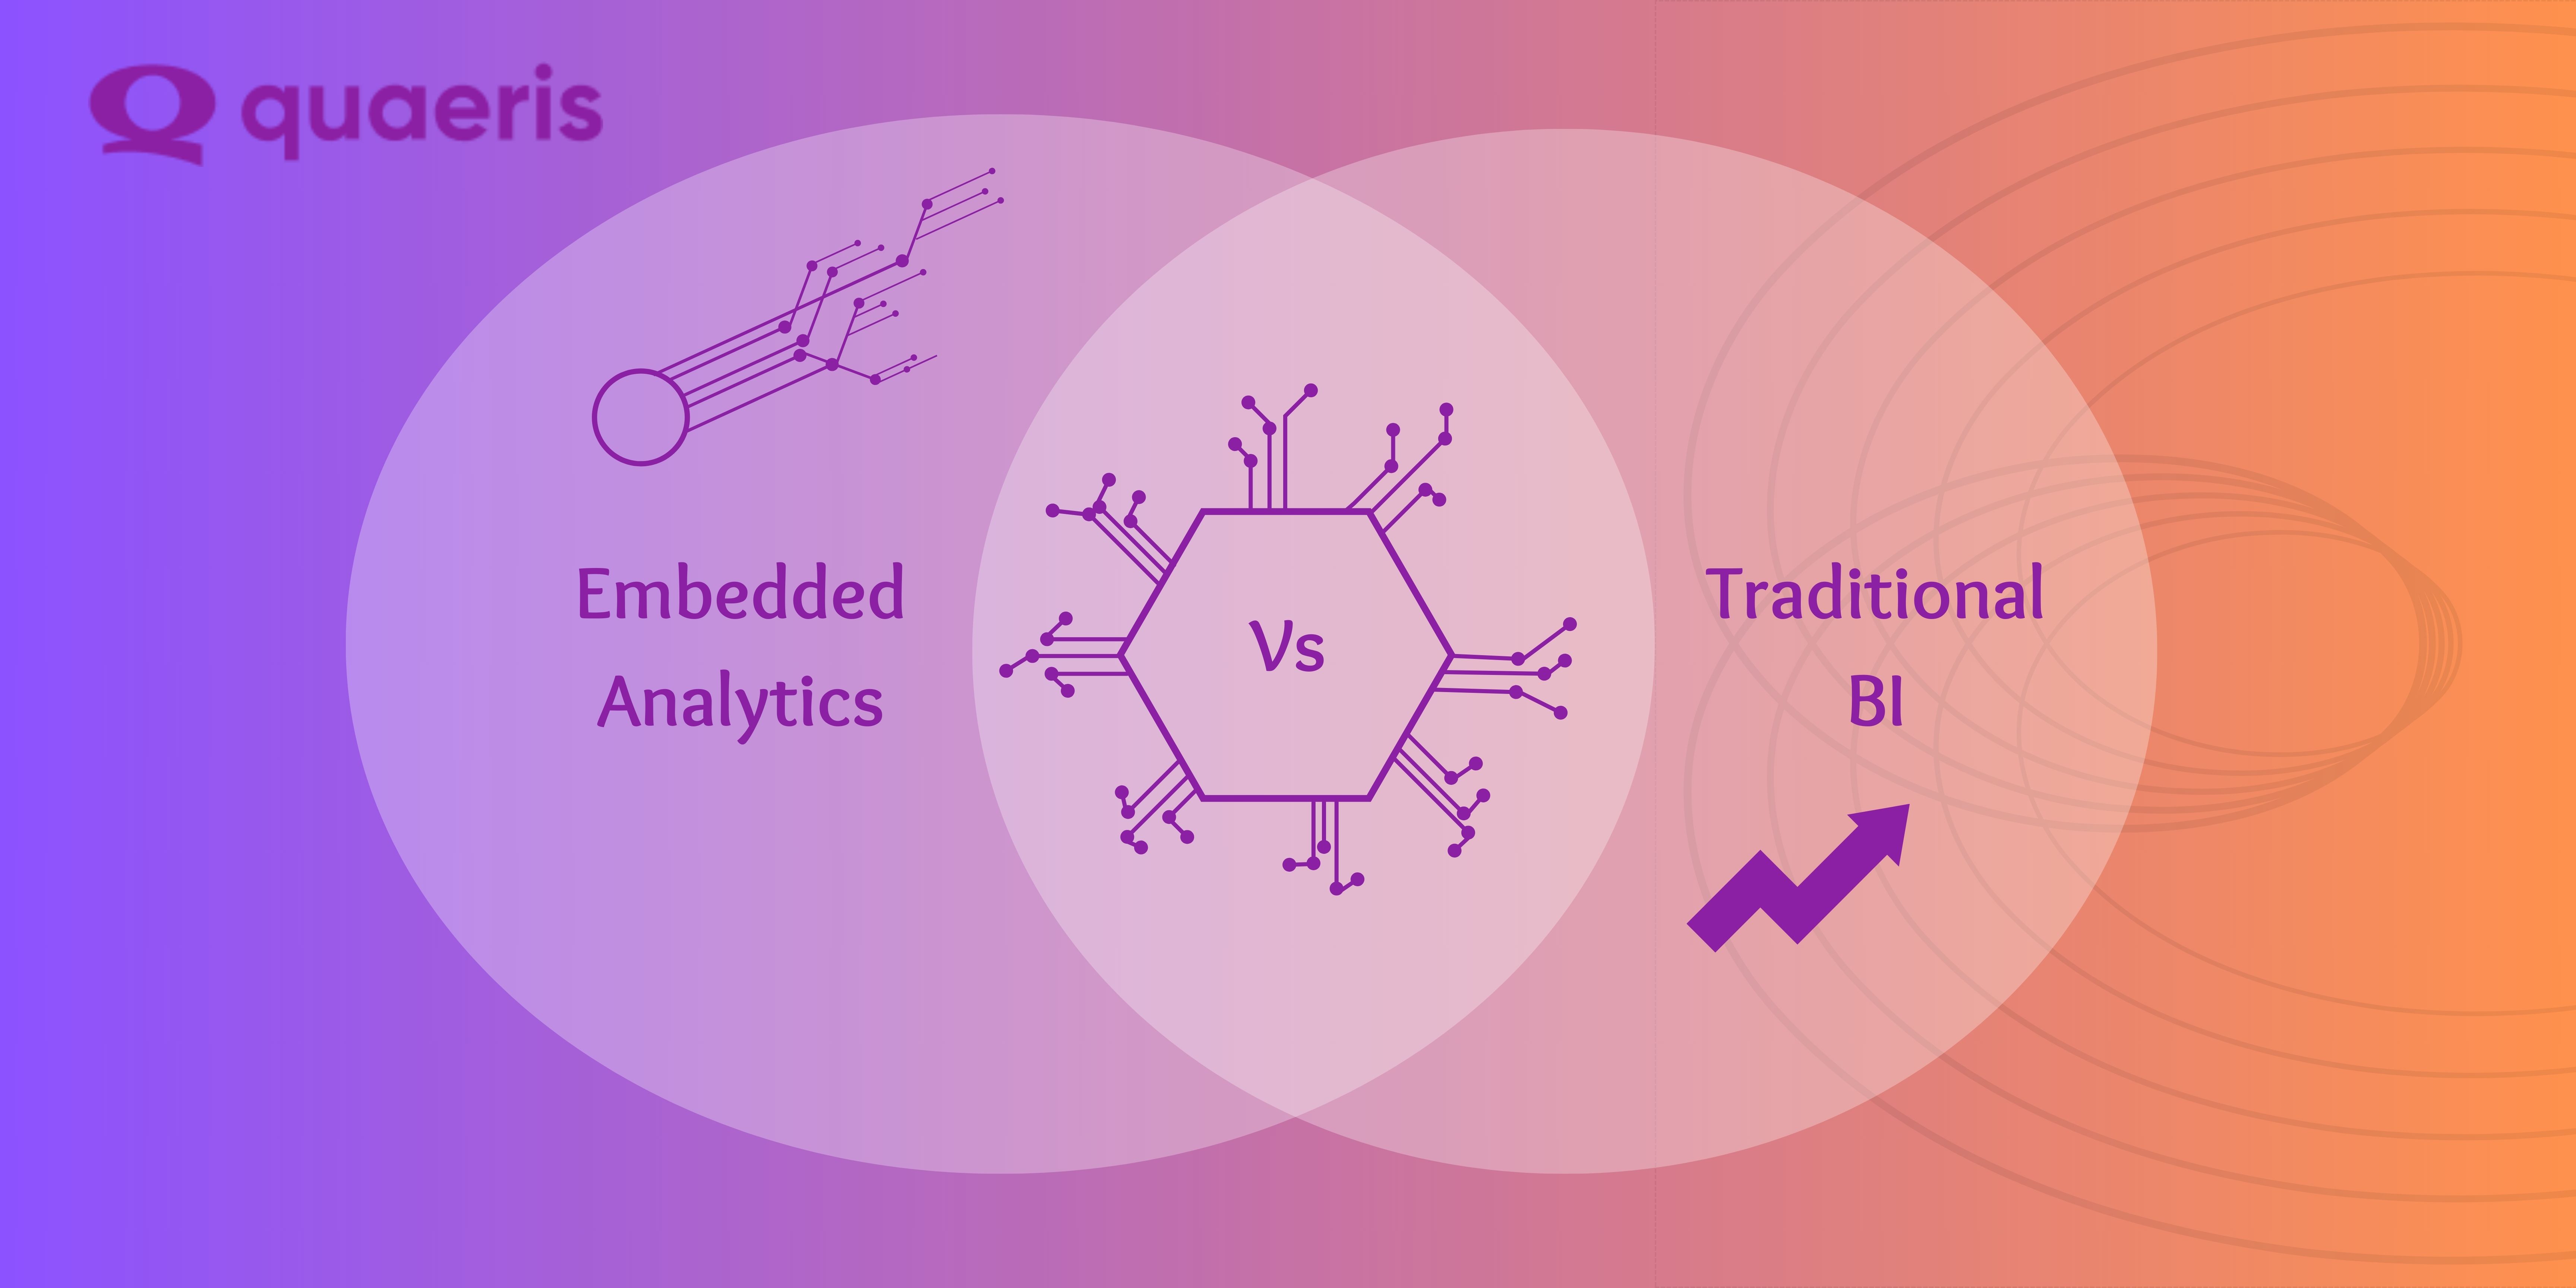 Embedded analytics vs. Traditional business